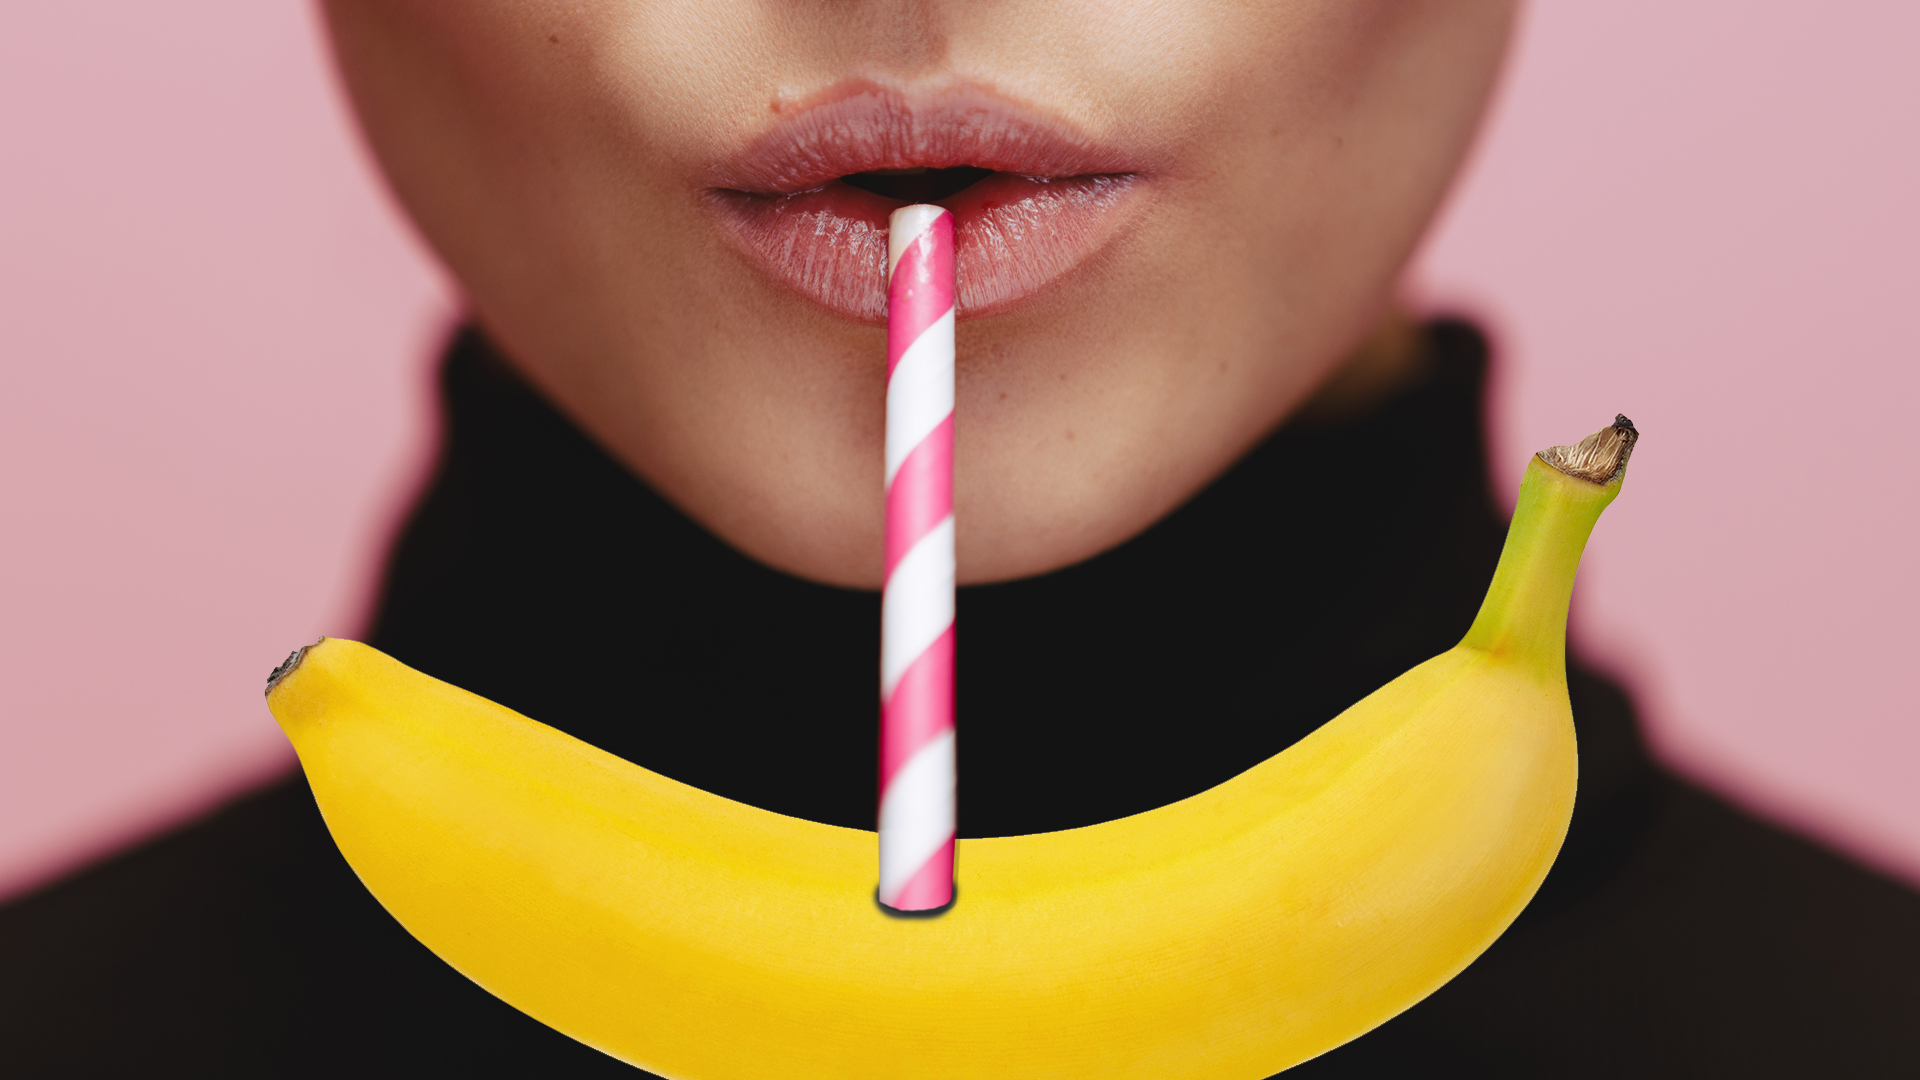 A woman drinking a banana with a straw